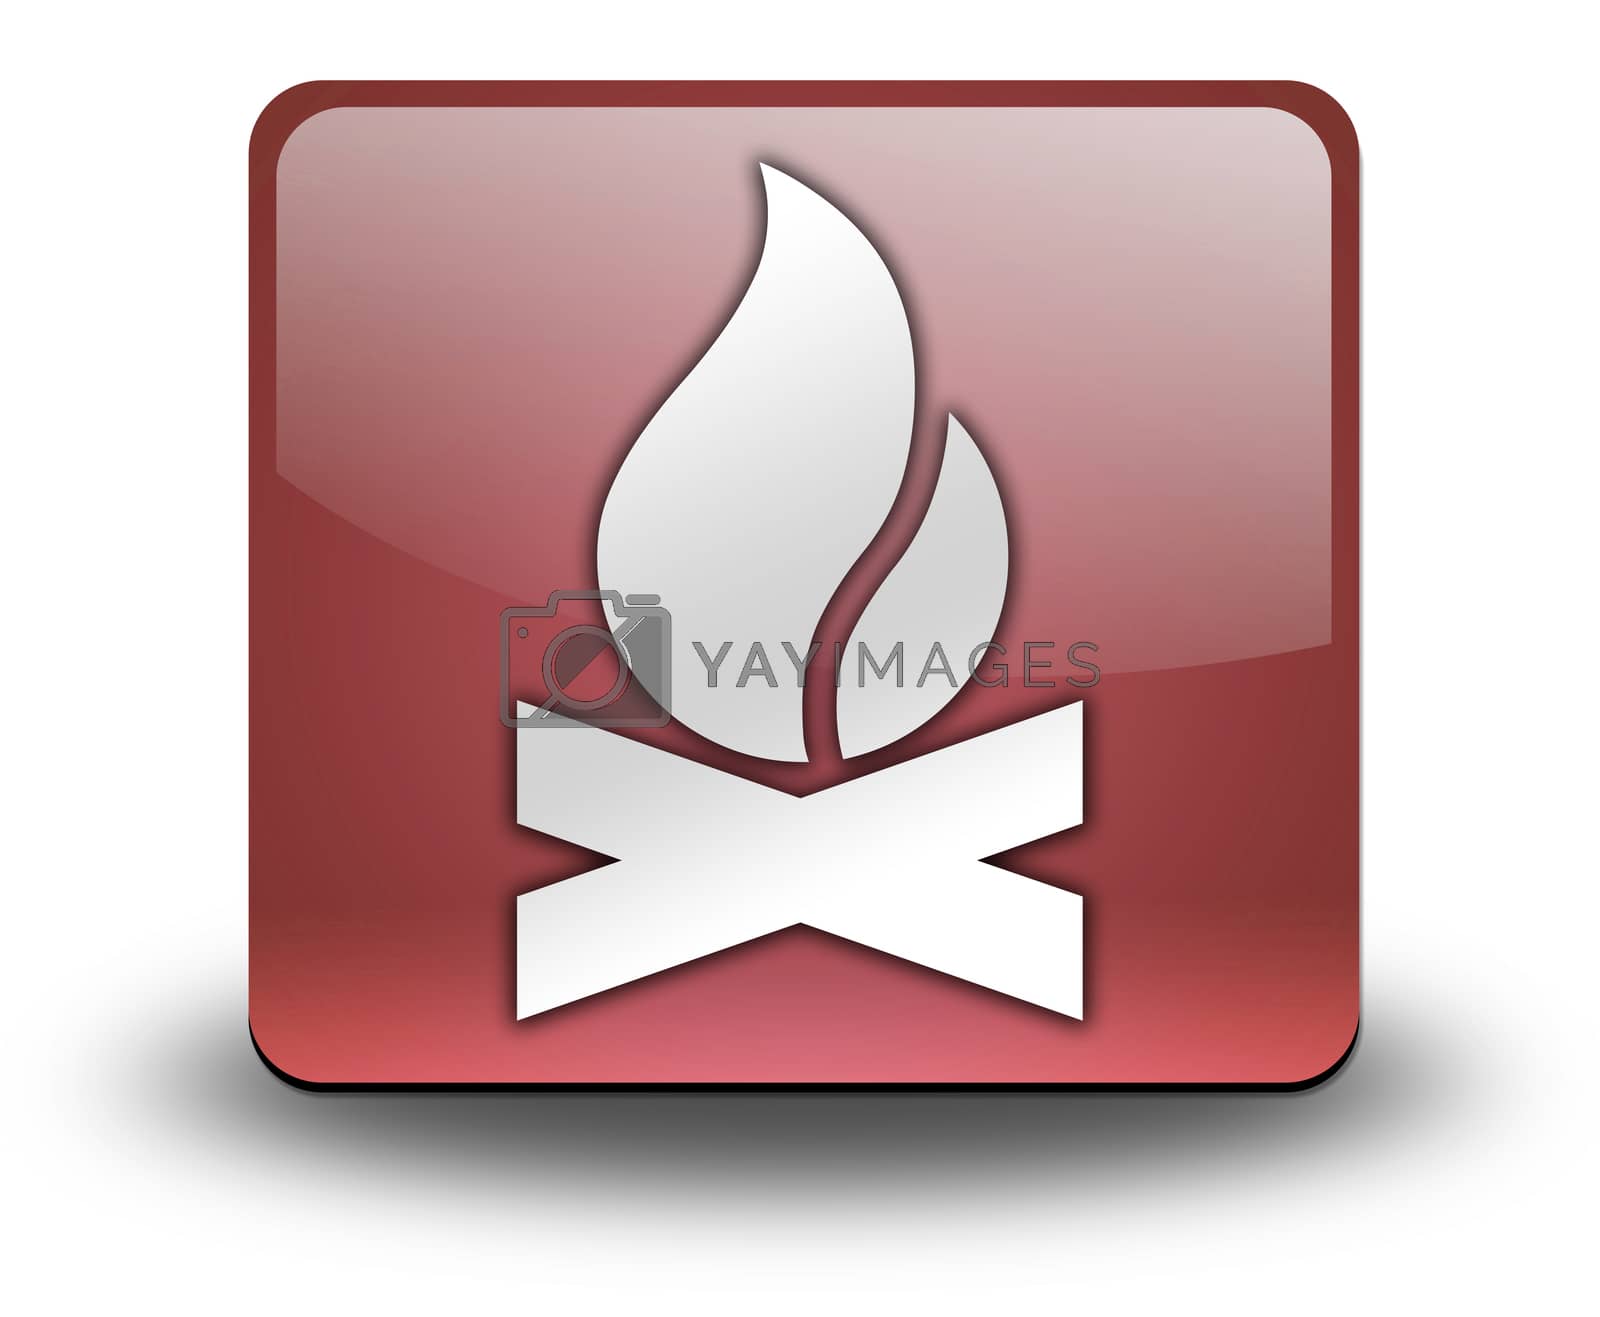 Royalty free image of Icon, Button, Pictogram Campfire by mindscanner